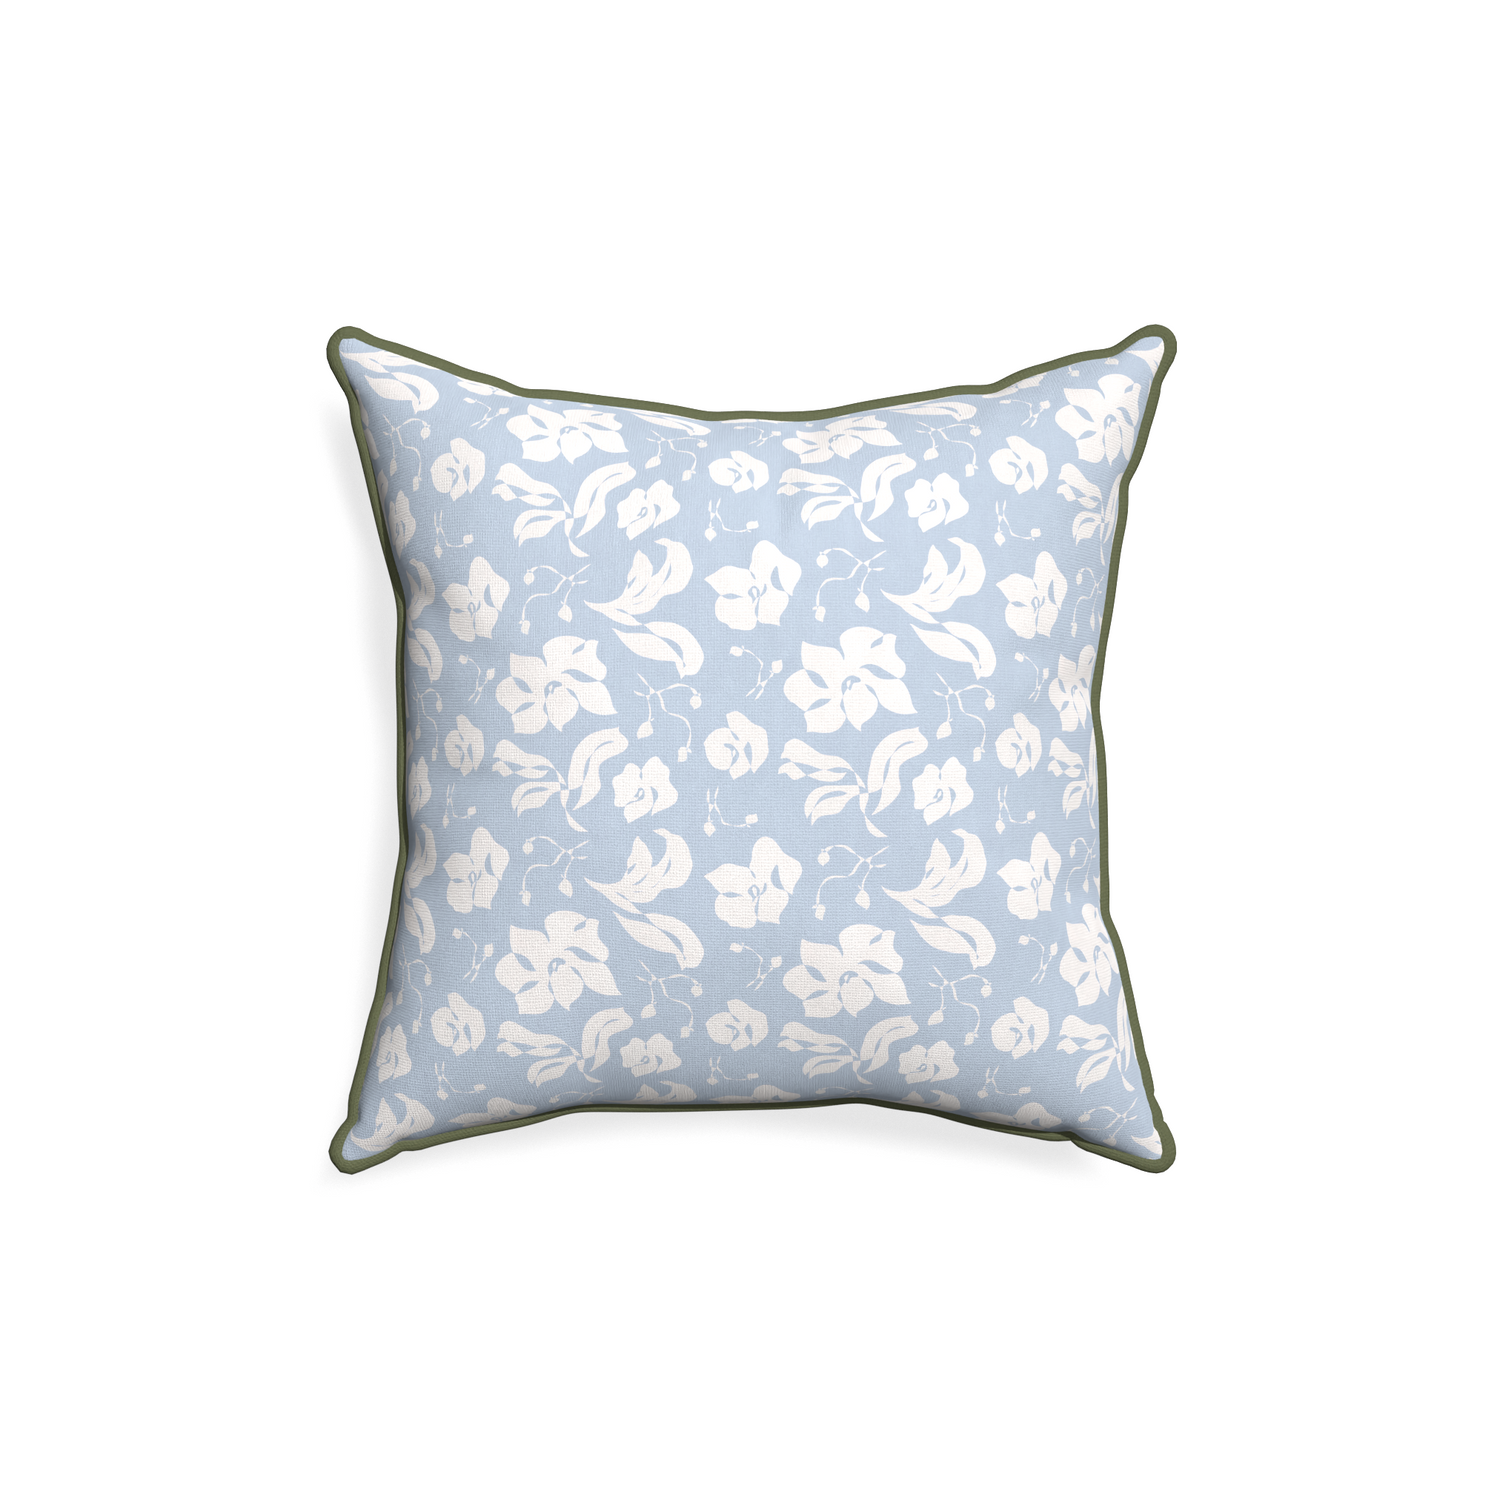 18-square georgia custom cornflower blue floralpillow with f piping on white background